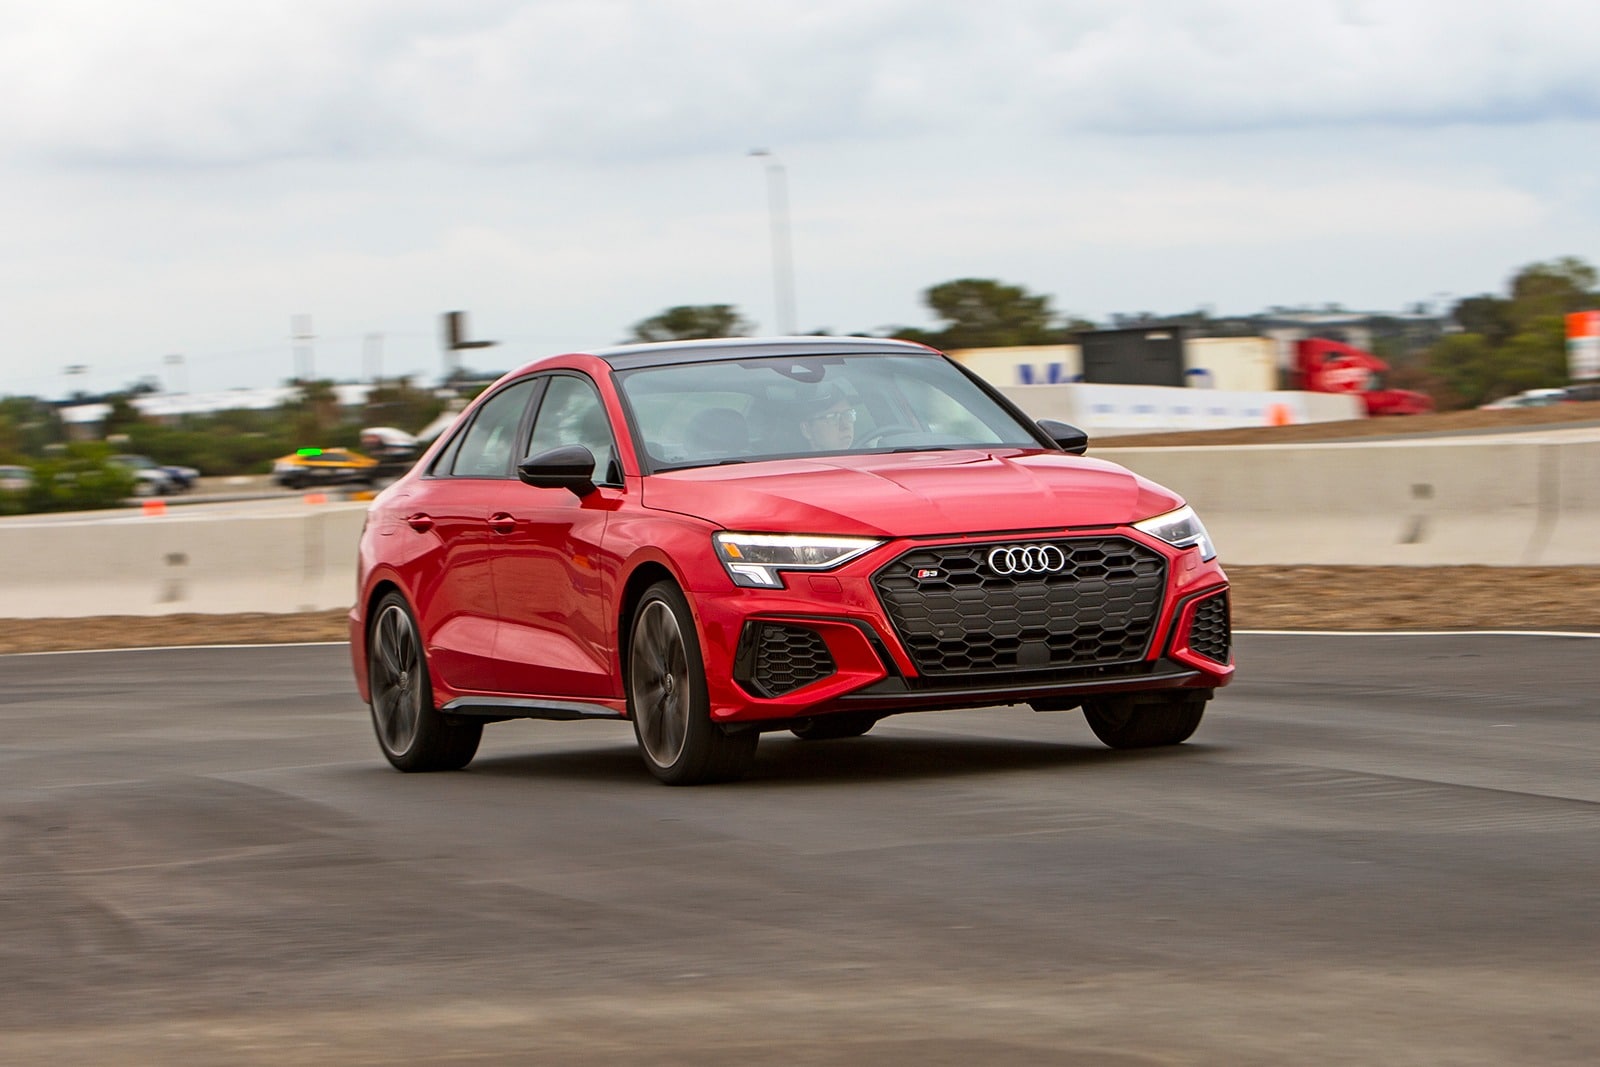 TESTED: The 2022 Audi S3 Is a Small and Sprightly Sleeper